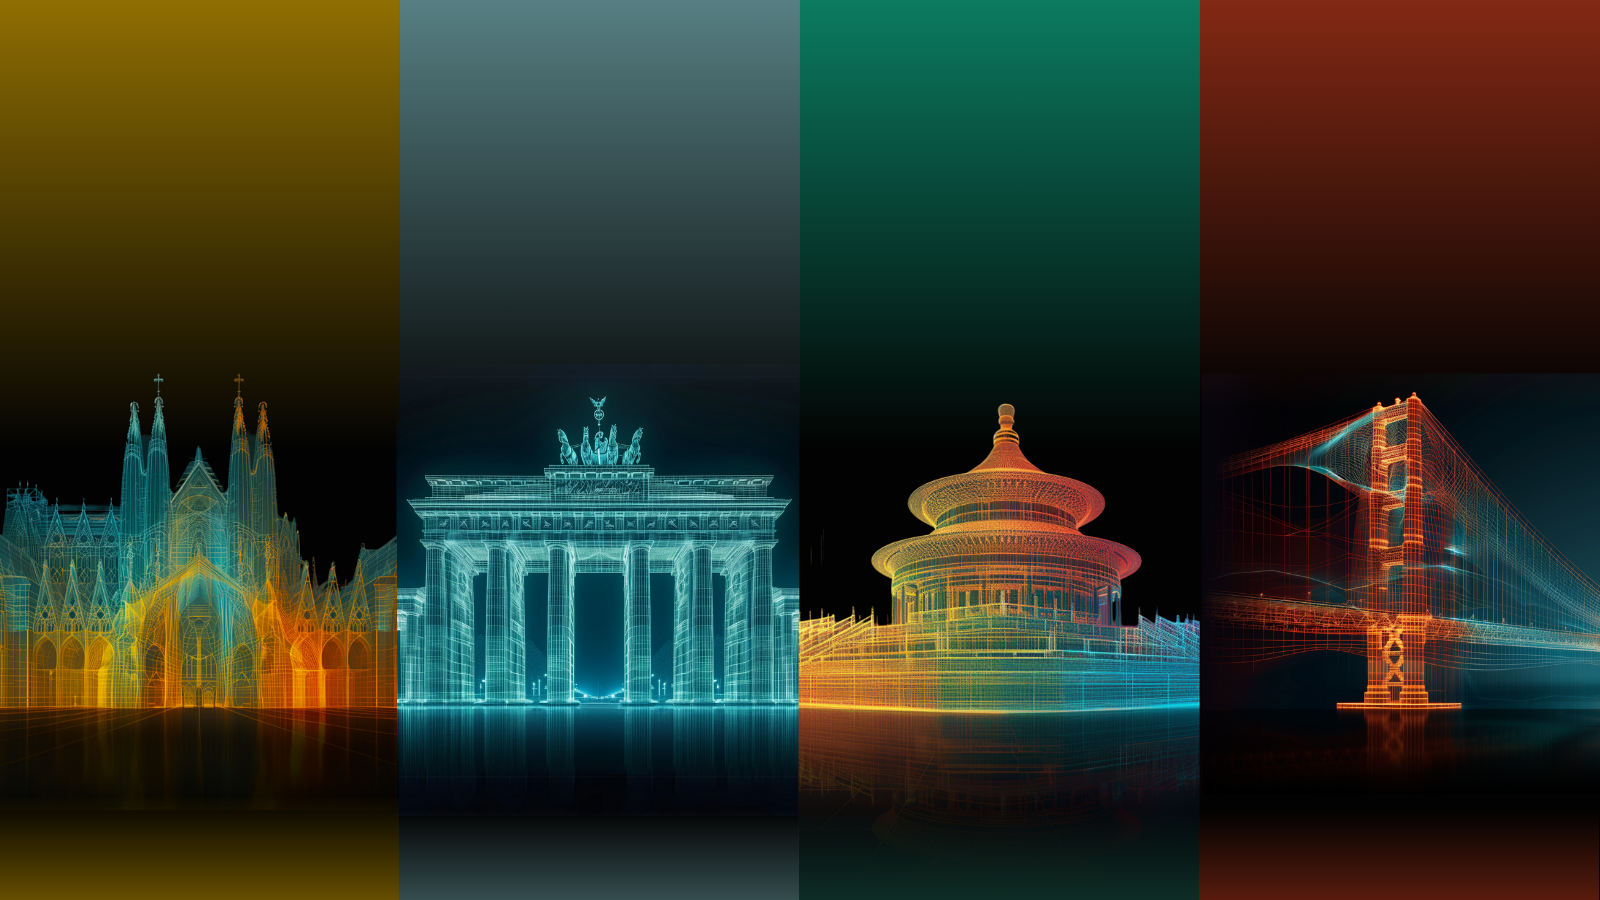 Composite image of four colorful, stylized landmarks: Brandenburg Gate, St. Peter's Basilica, Tiananmen, and Golden Gate Brid